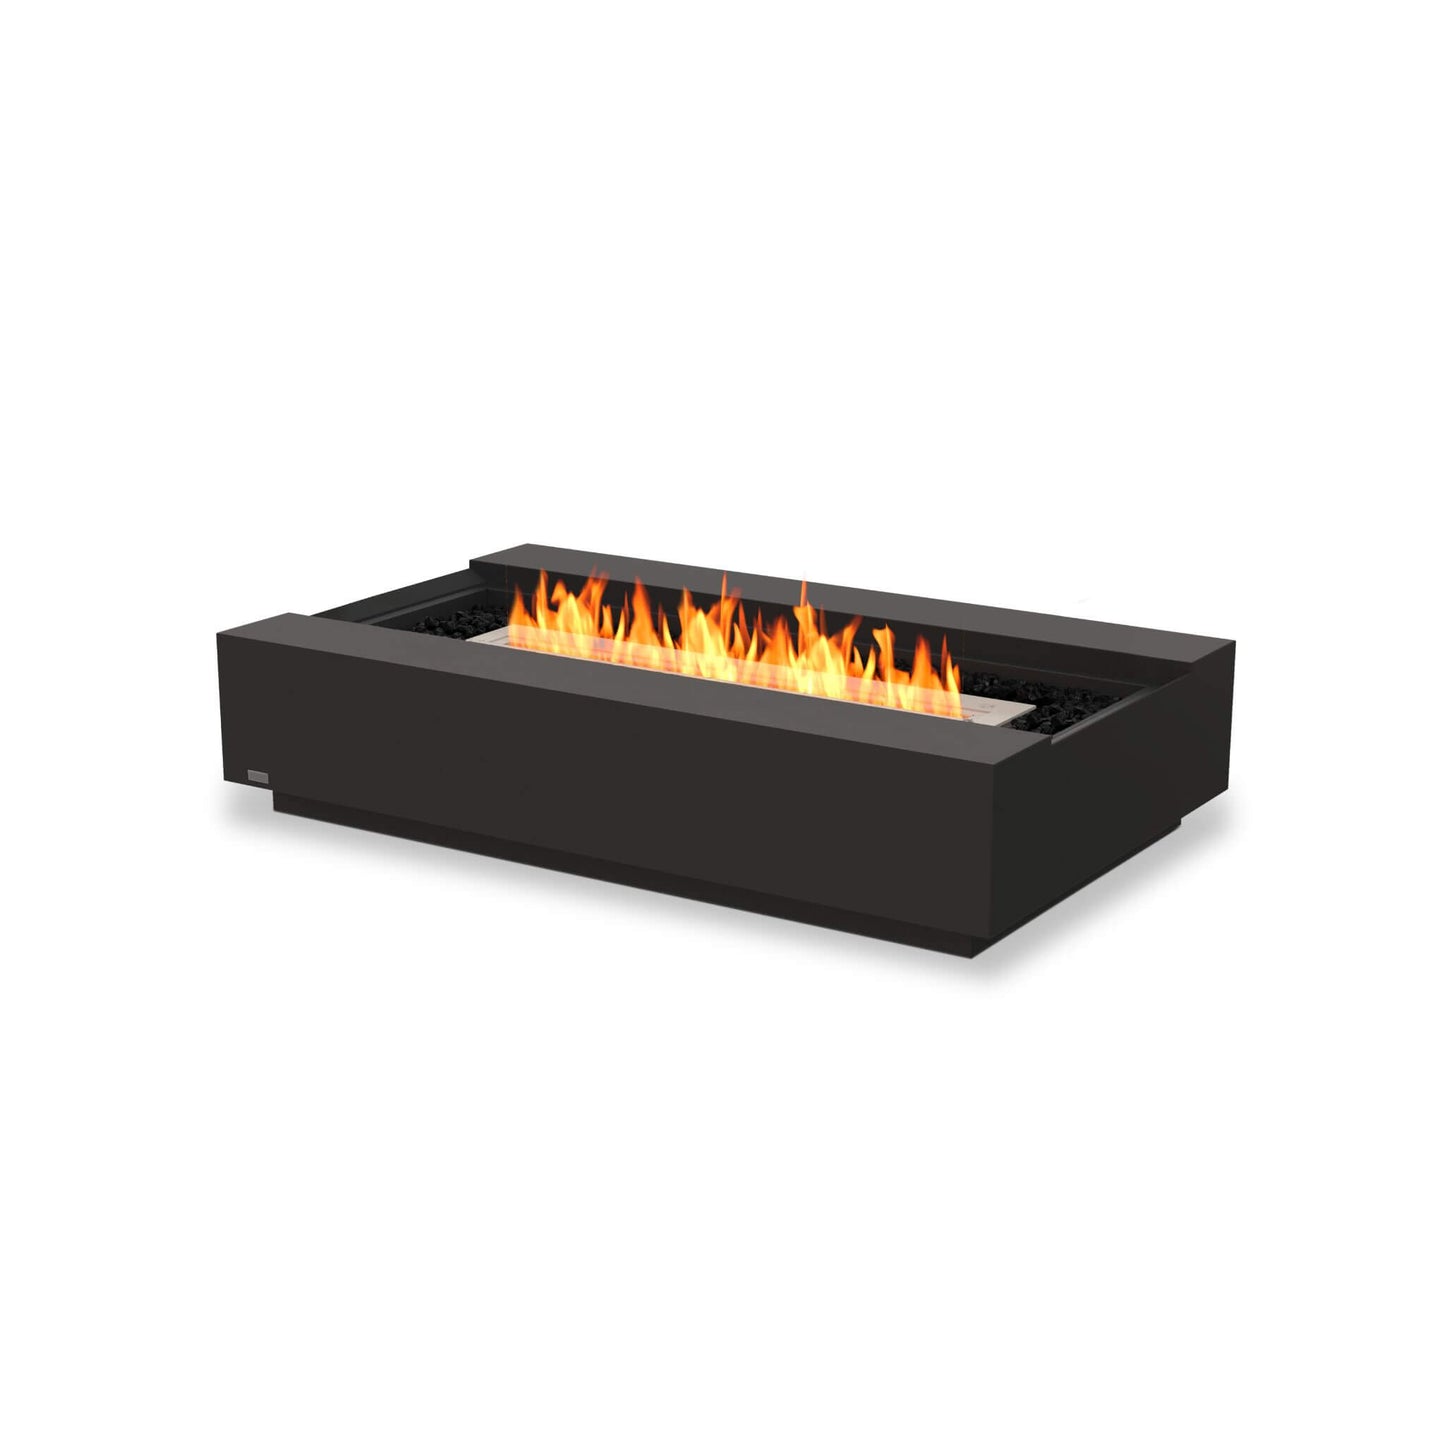 Cosmo 50 Linear Bio Ethanol Concrete Fire Pit Coffee Table with stainless steel burner in Graphite (black) for Indoor & Outdoor Heating by Ecosmart Fire